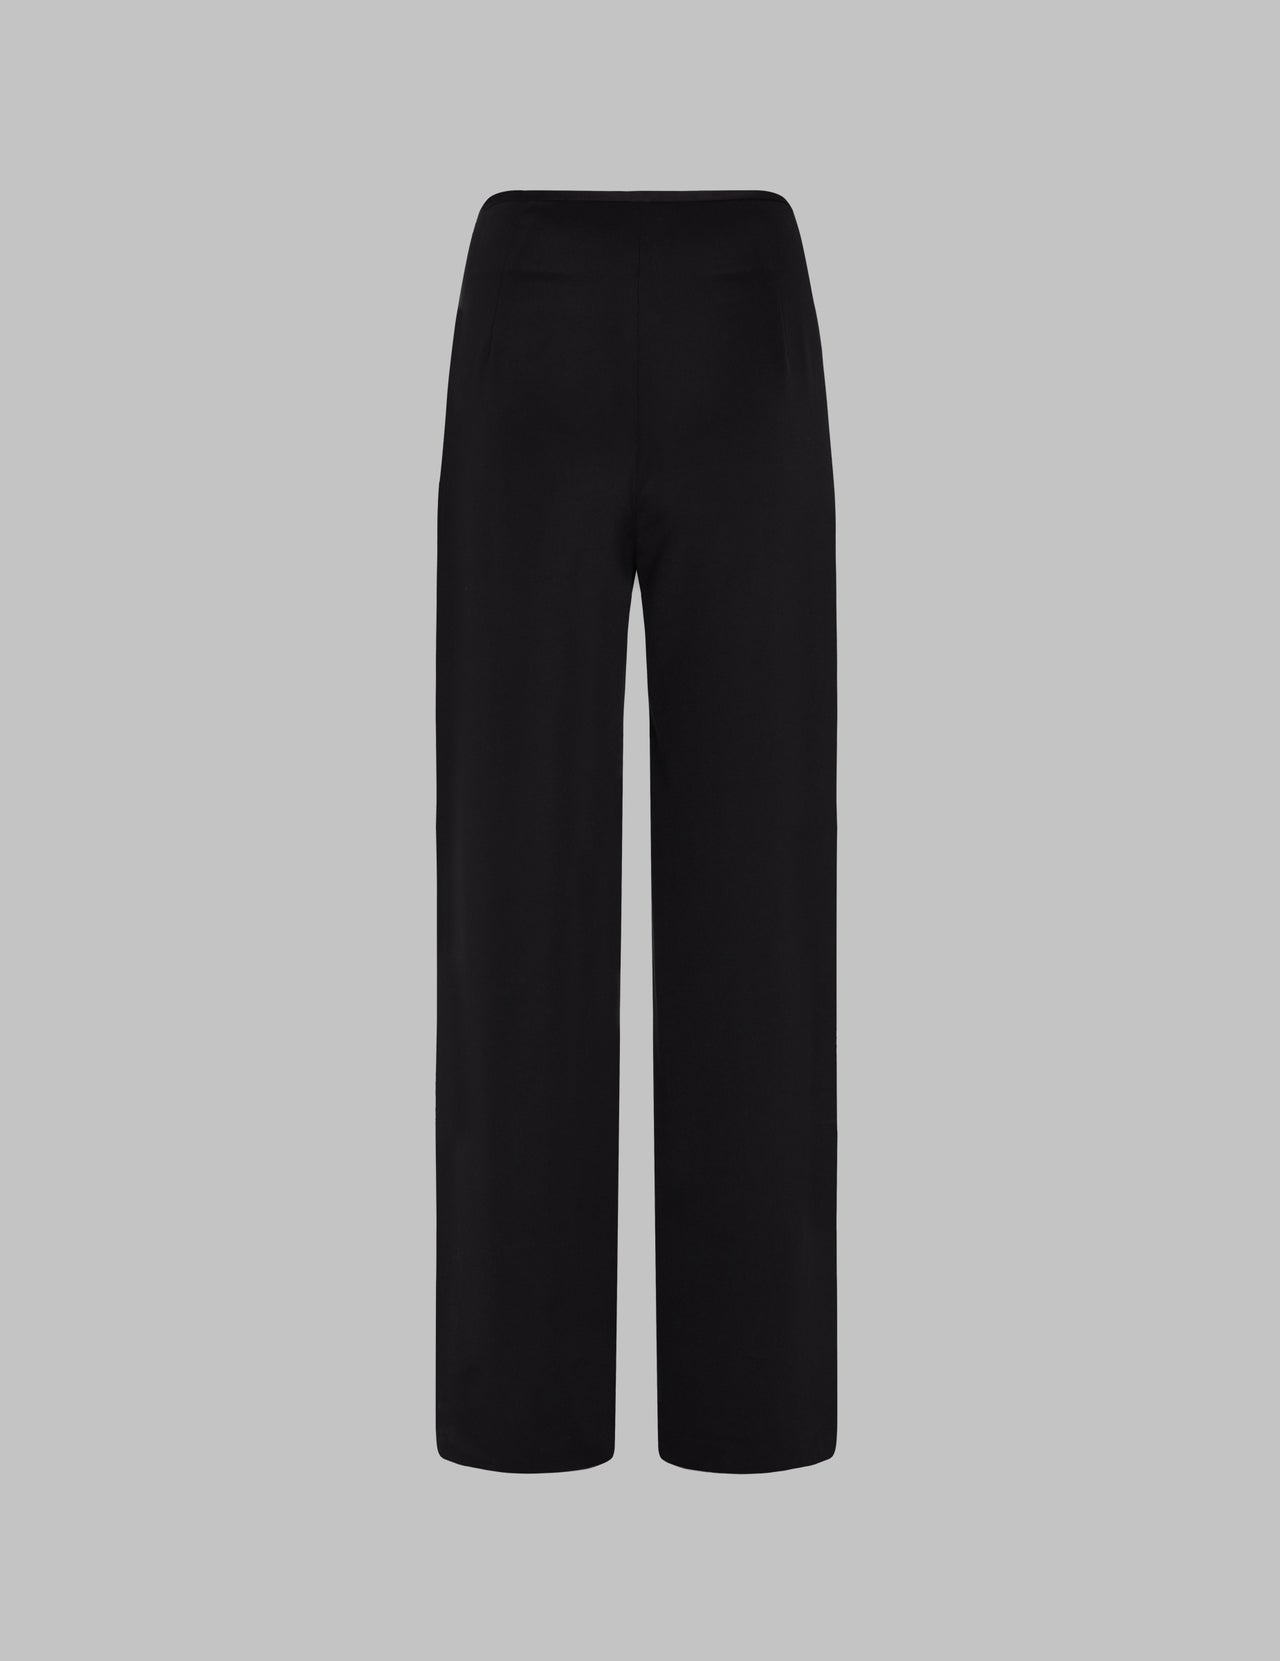  Black Silk Crepe Nadia Trouser With Thin Waistband 